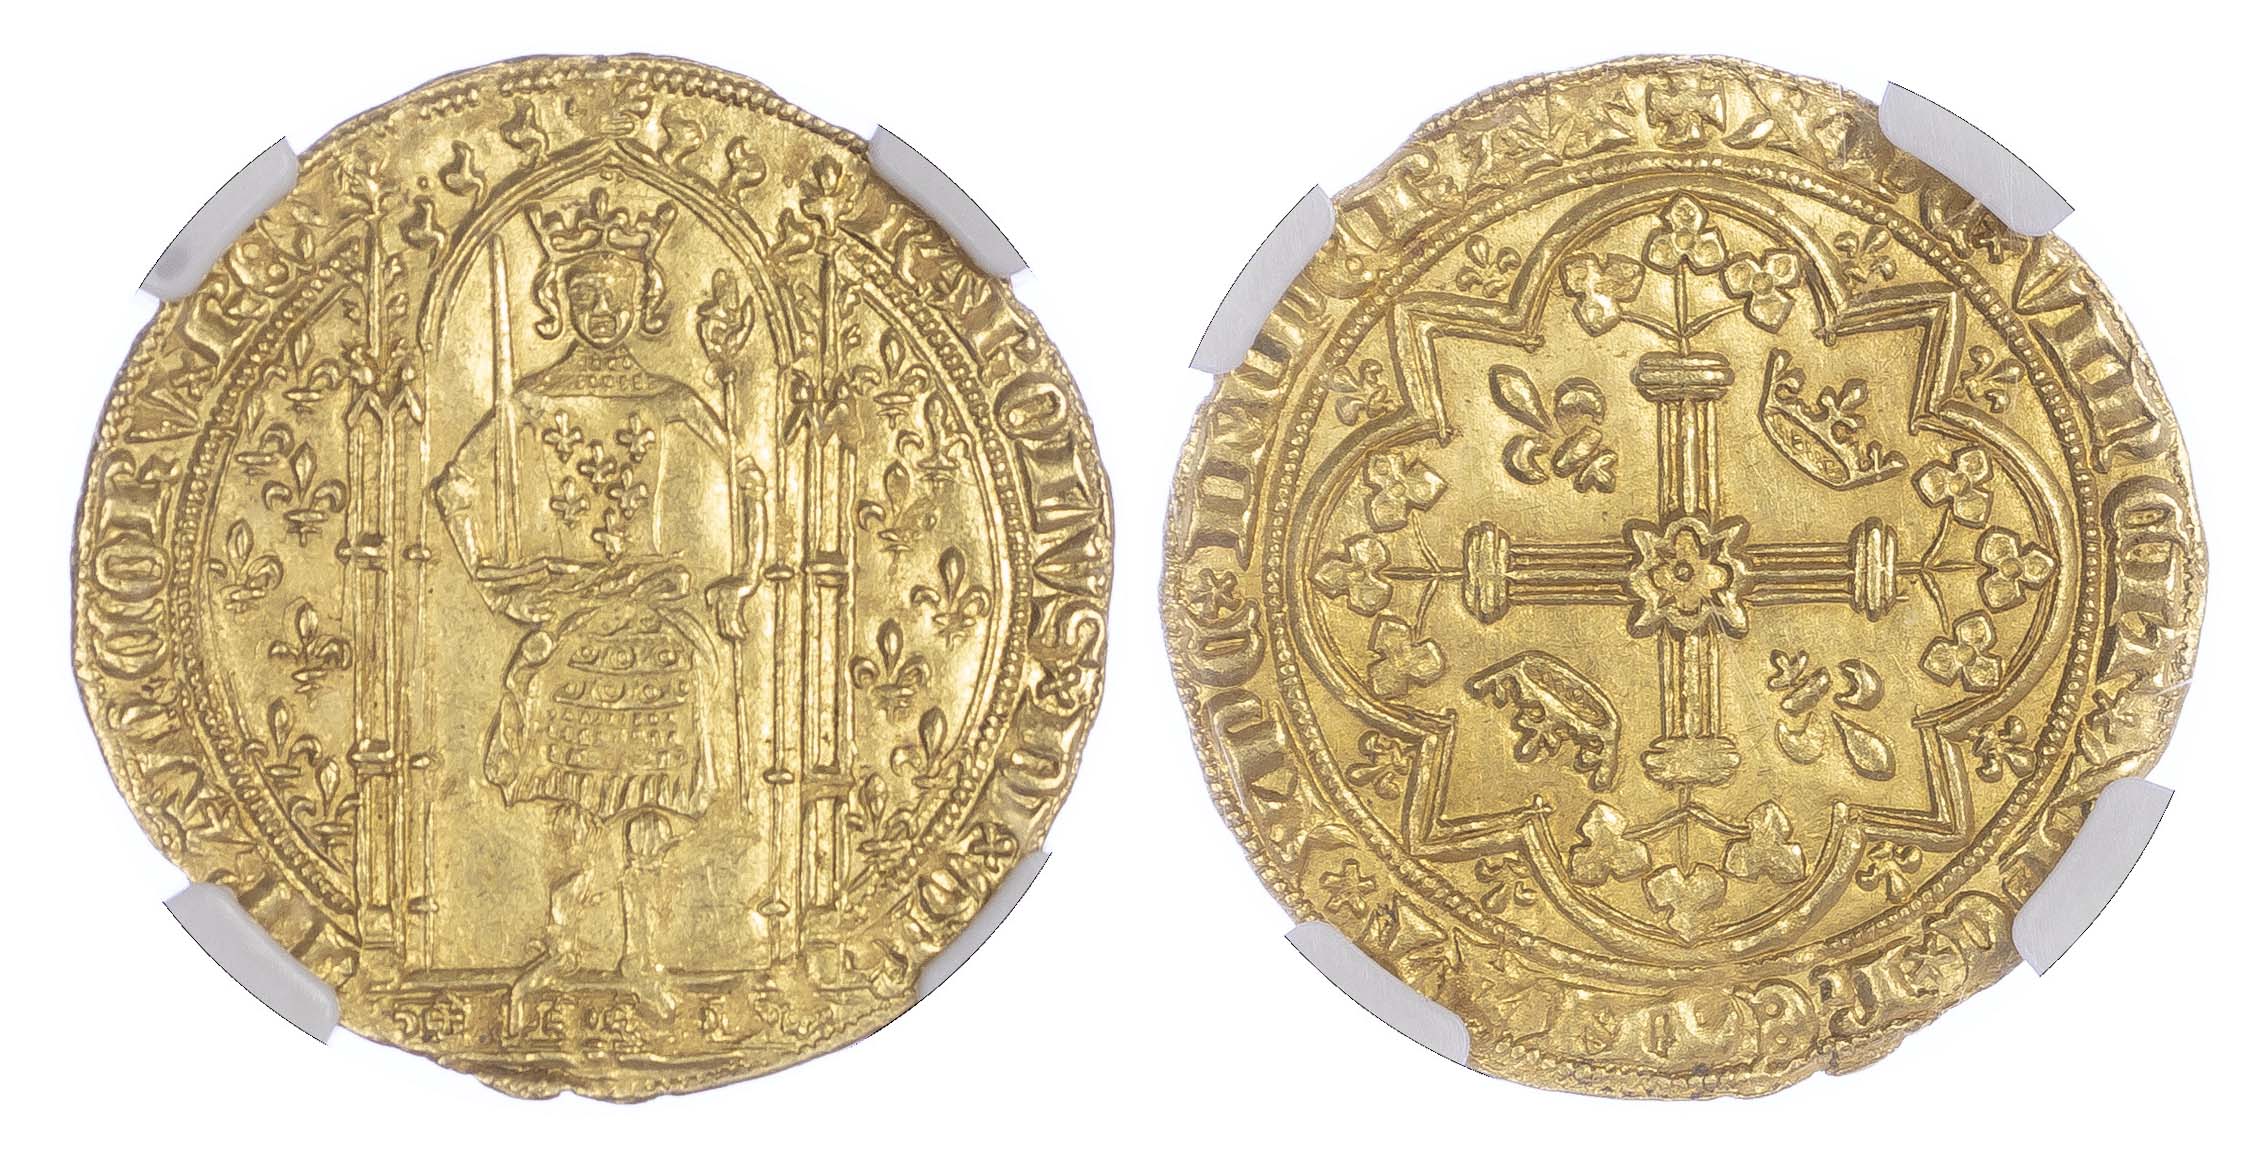 France, Charles V (the Wise) (1364-80), gold Franc à pied - MS 64